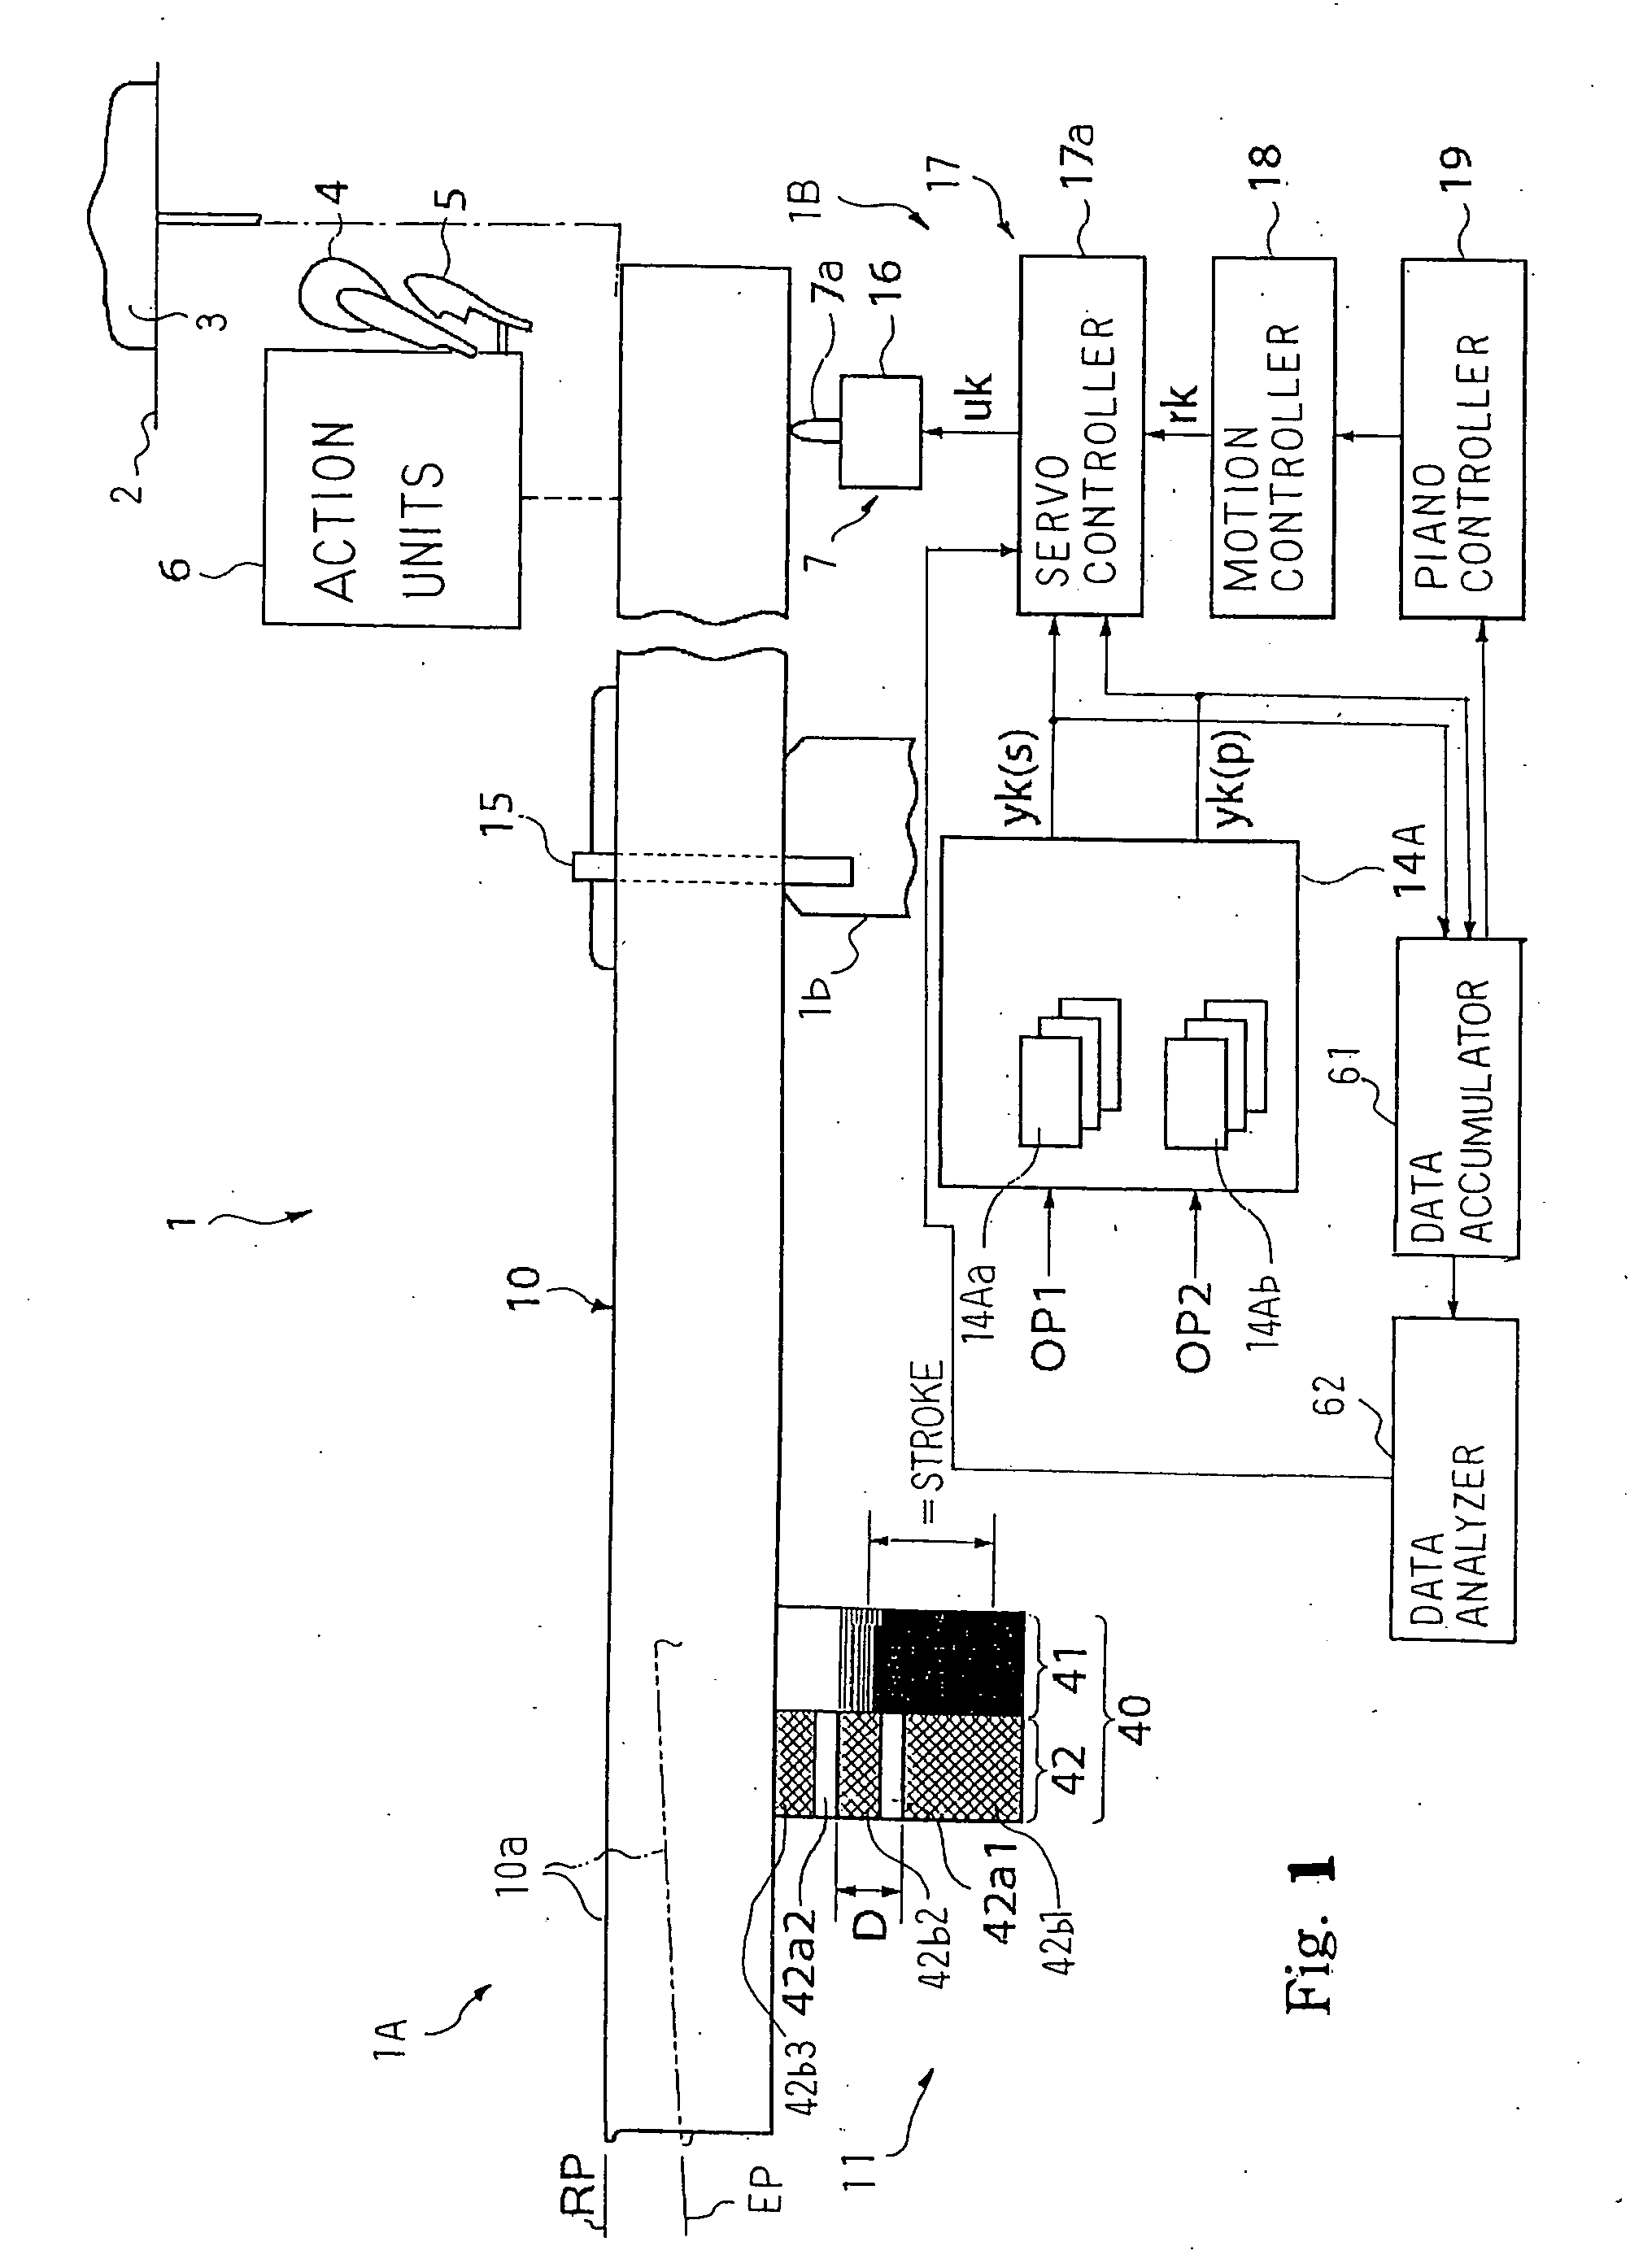 Self-calibrating transducer system and musical instrument equipped with the same